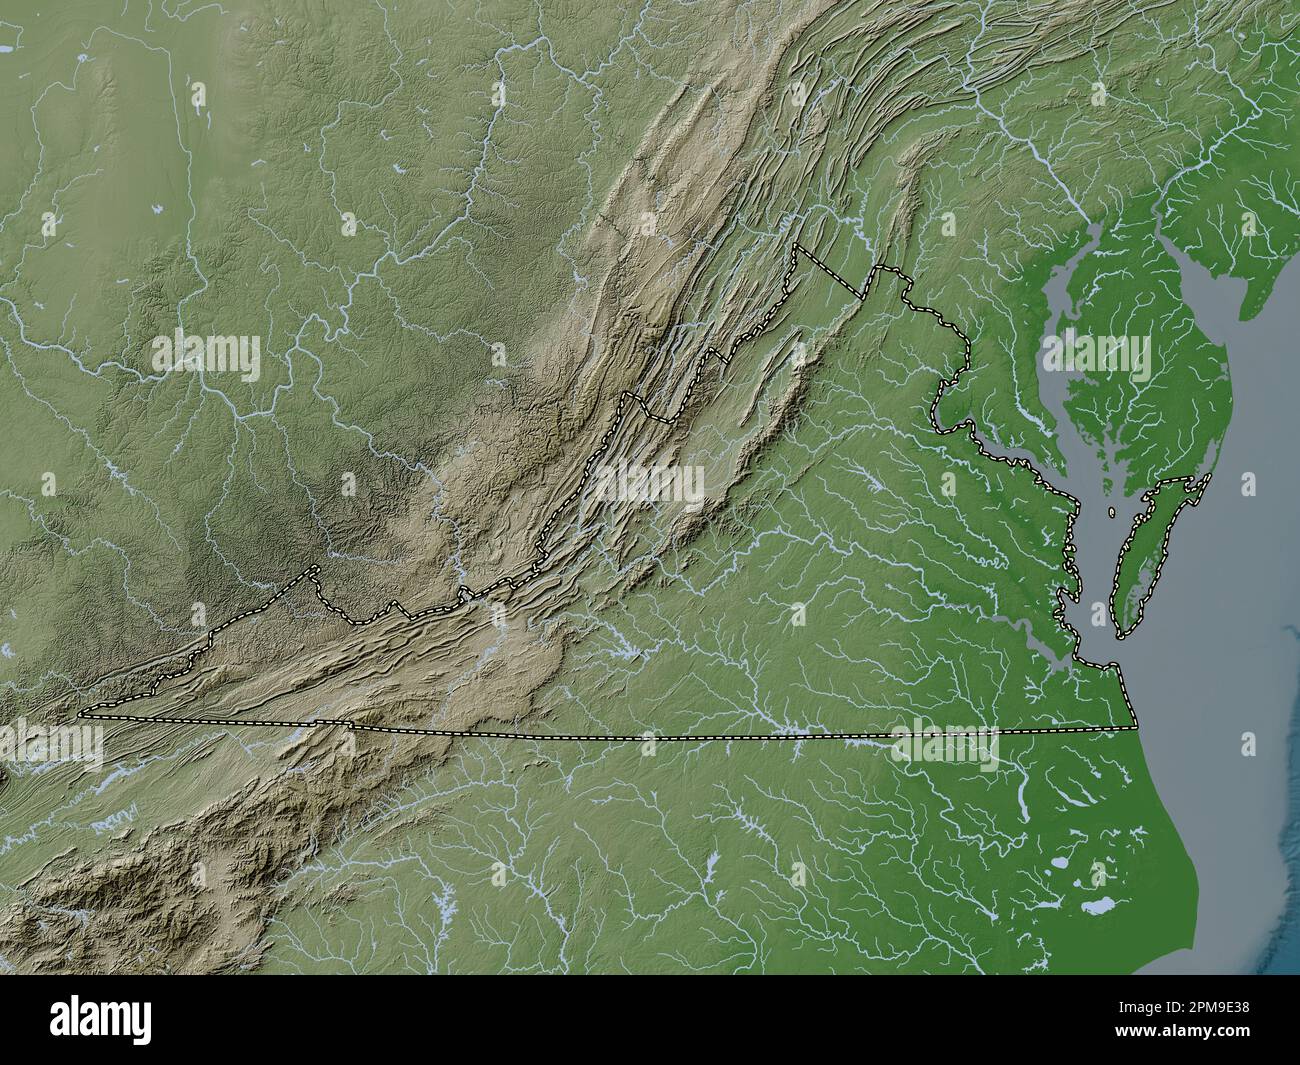 Virginia, state of United States of America. Elevation map colored in wiki style with lakes and rivers Stock Photo